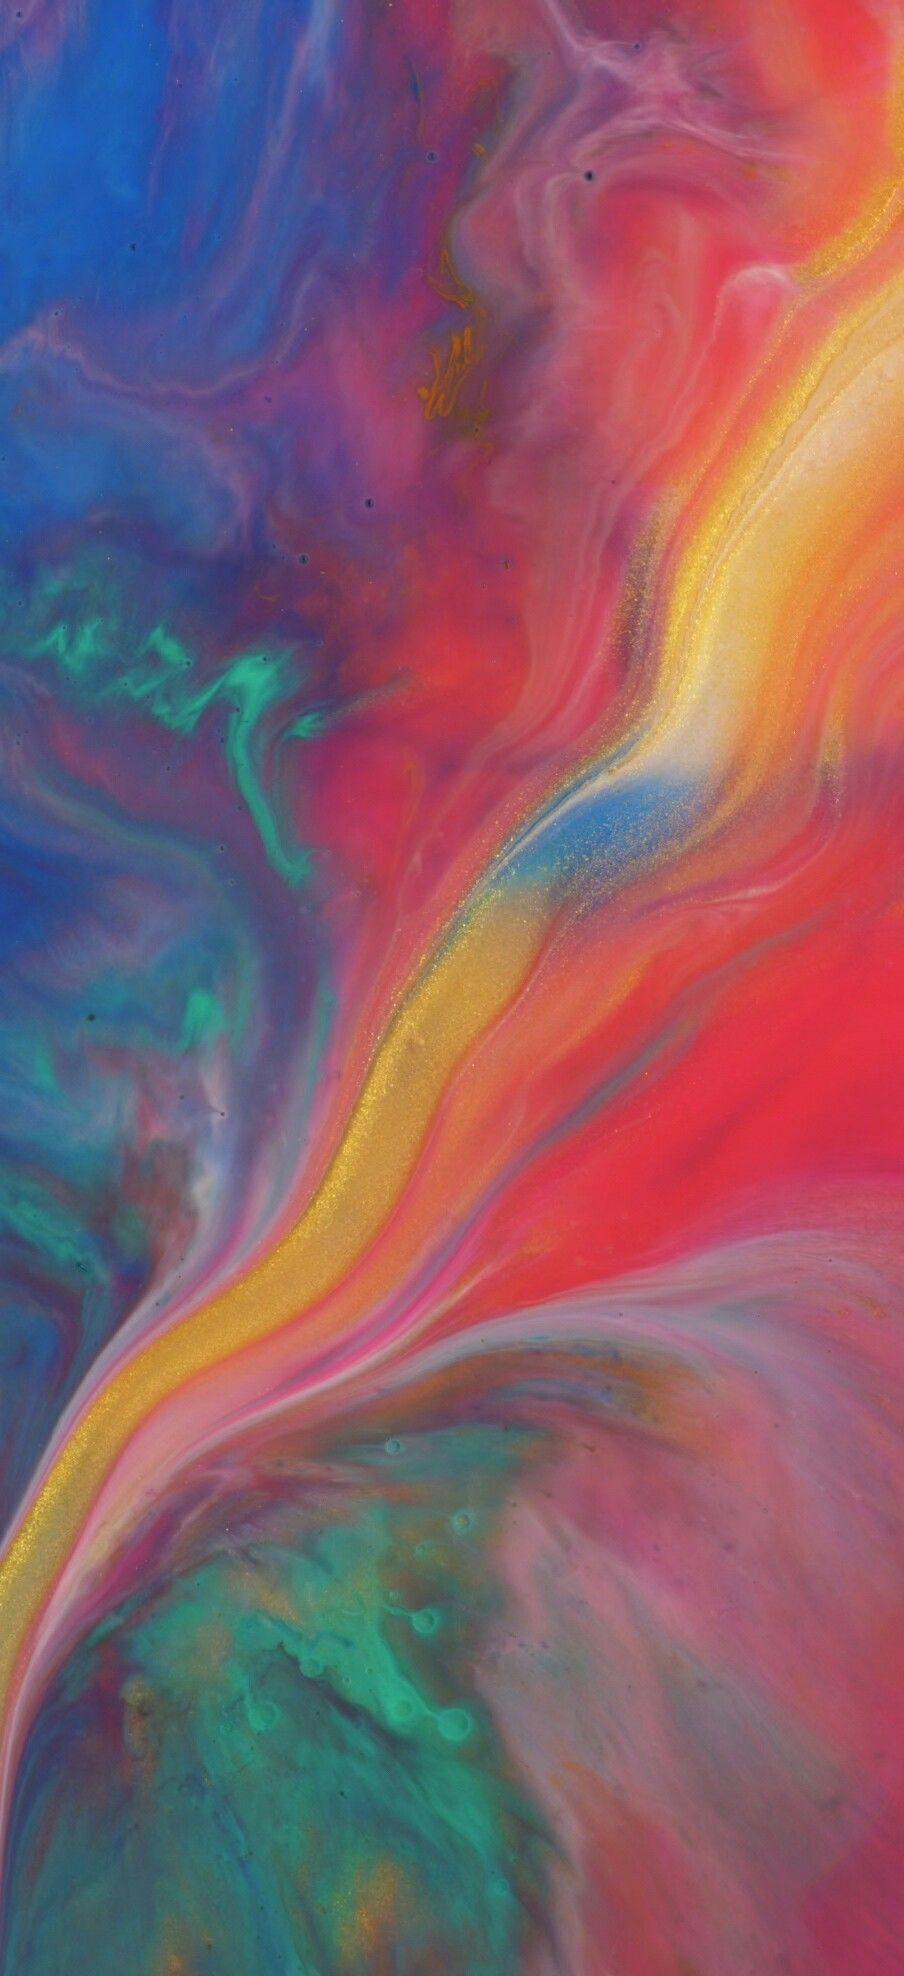 New IPHONE X stock wallpapers